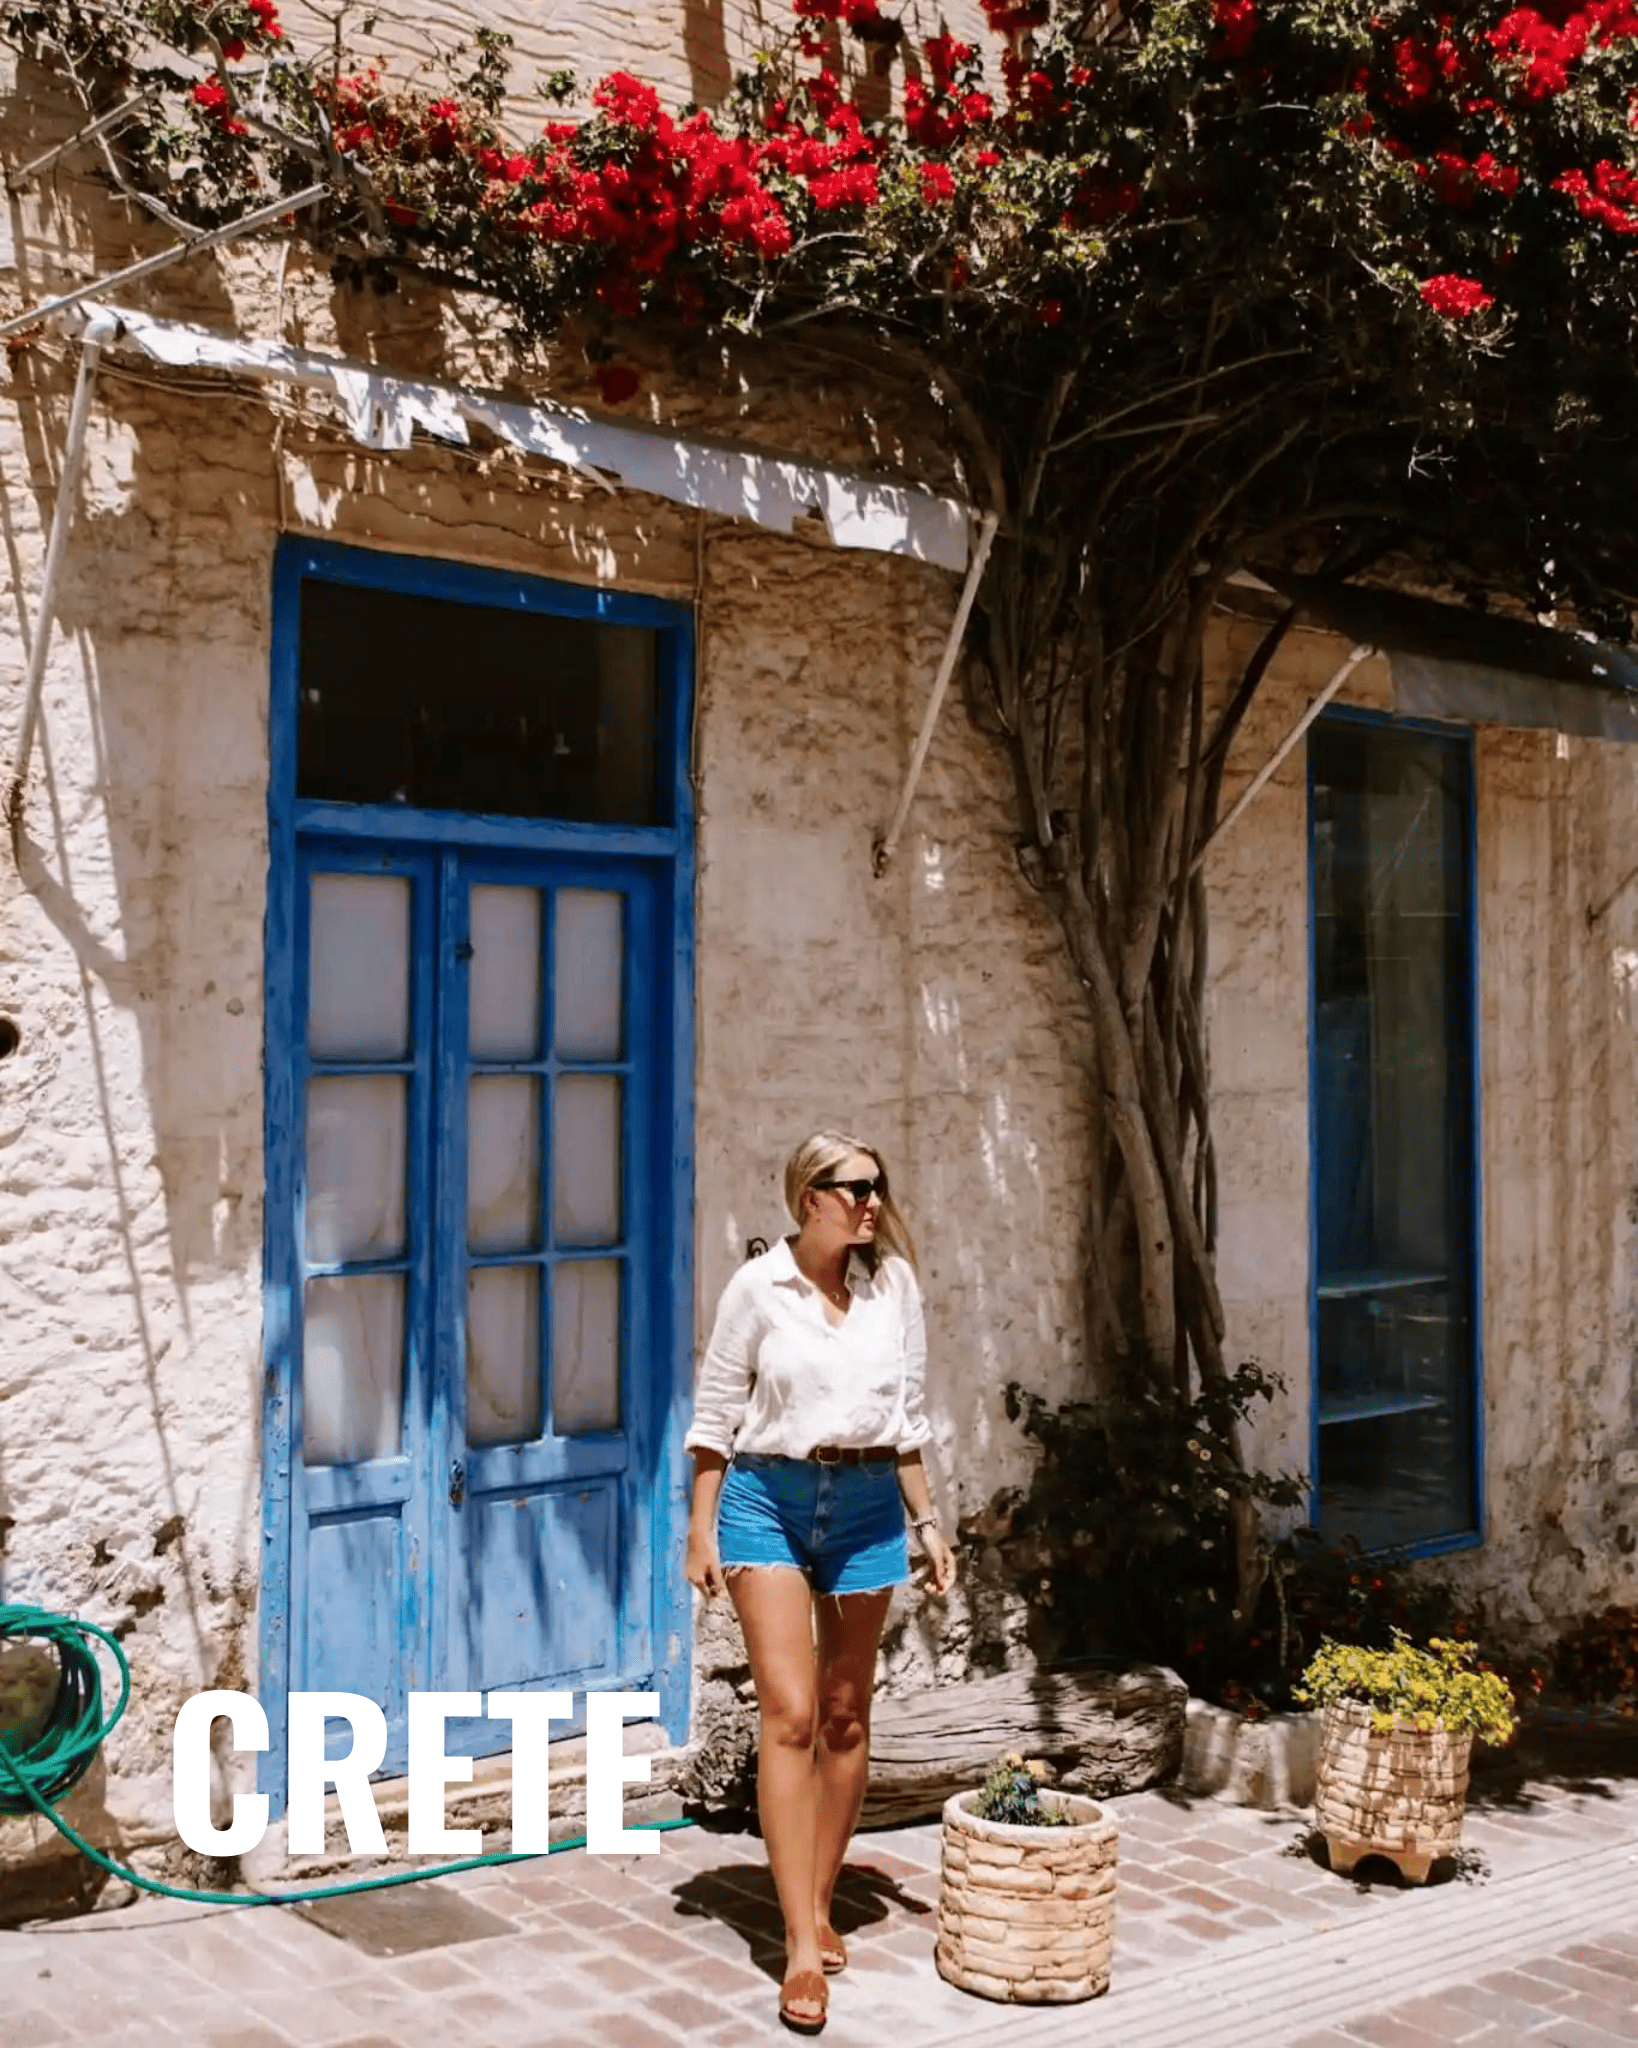 15 Best Places to Visit in Crete, Greece athens